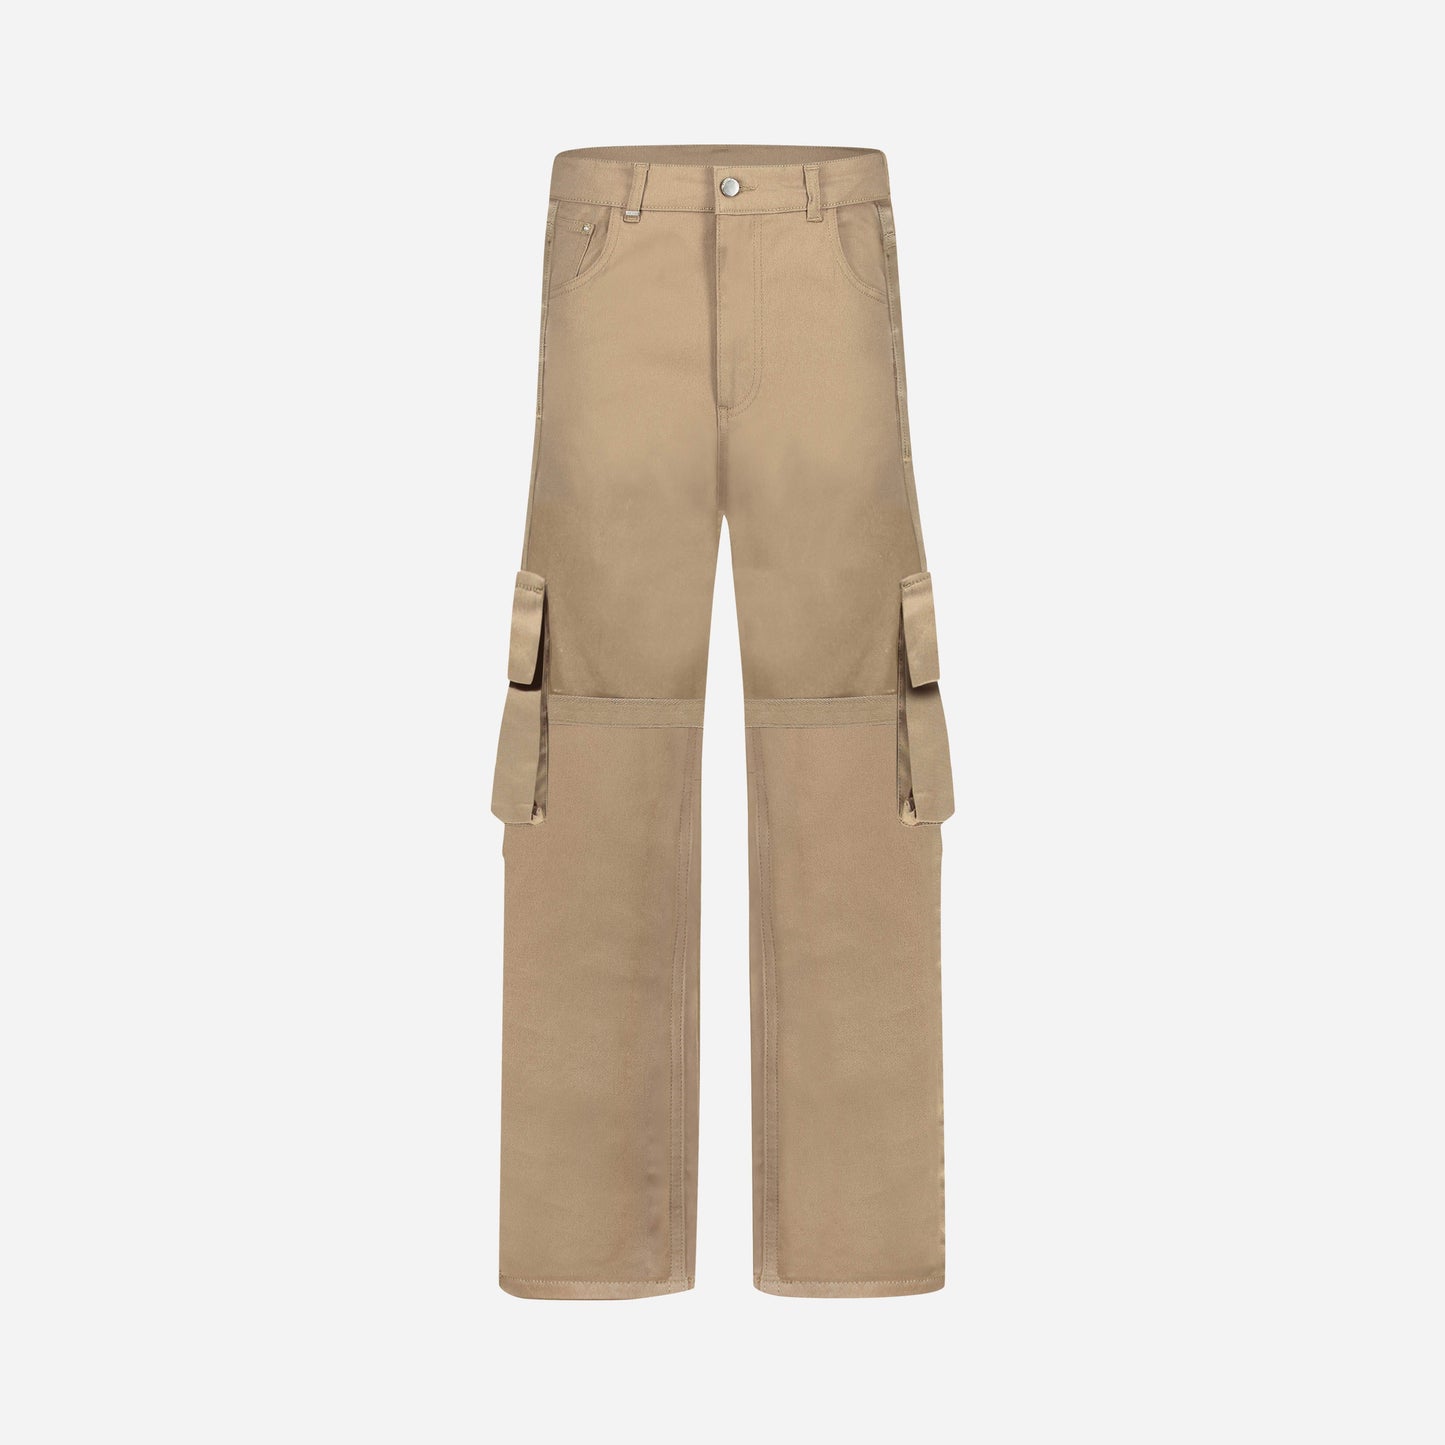 Strap Cargo Pants in Light Brown